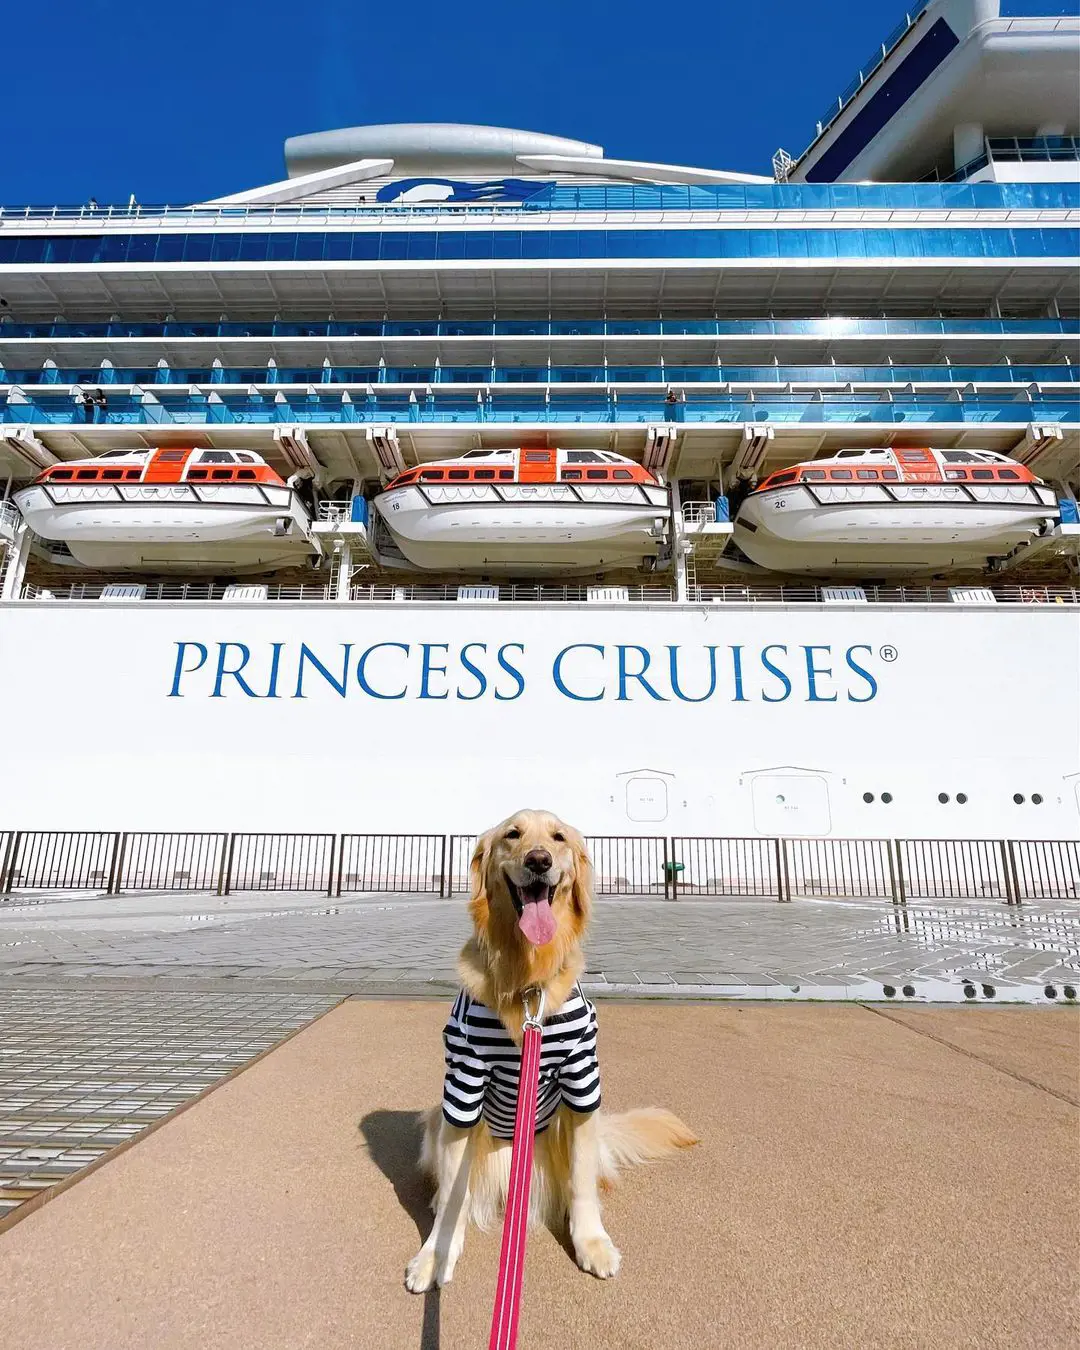 Even the furry babies can't stop smiling looking at Princess Cruise ships.